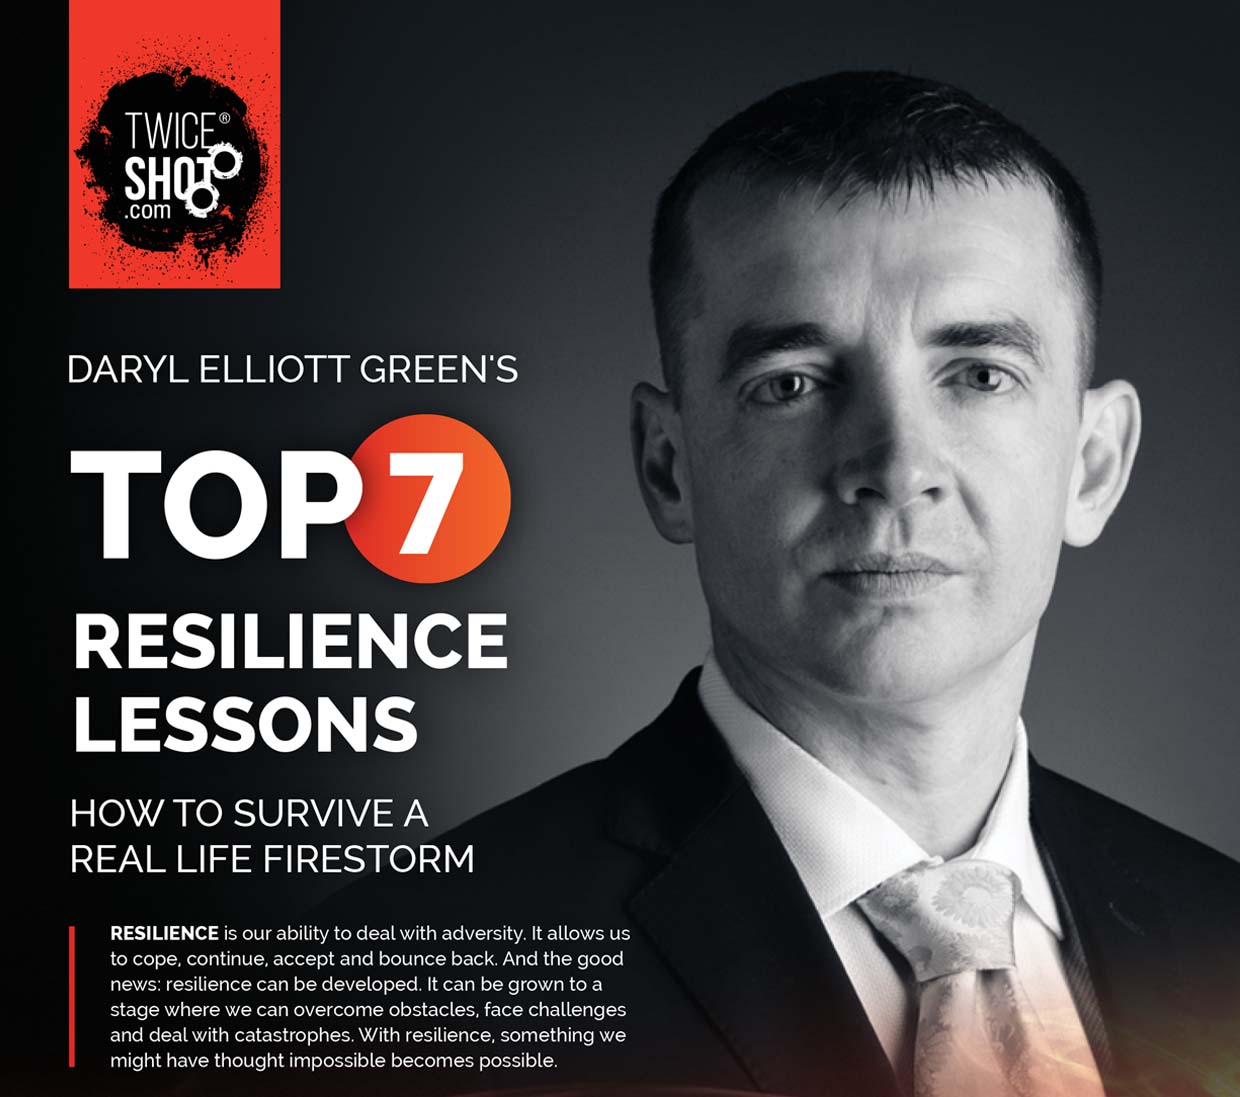 TWICESHOT Top 7 Resilience Lessons